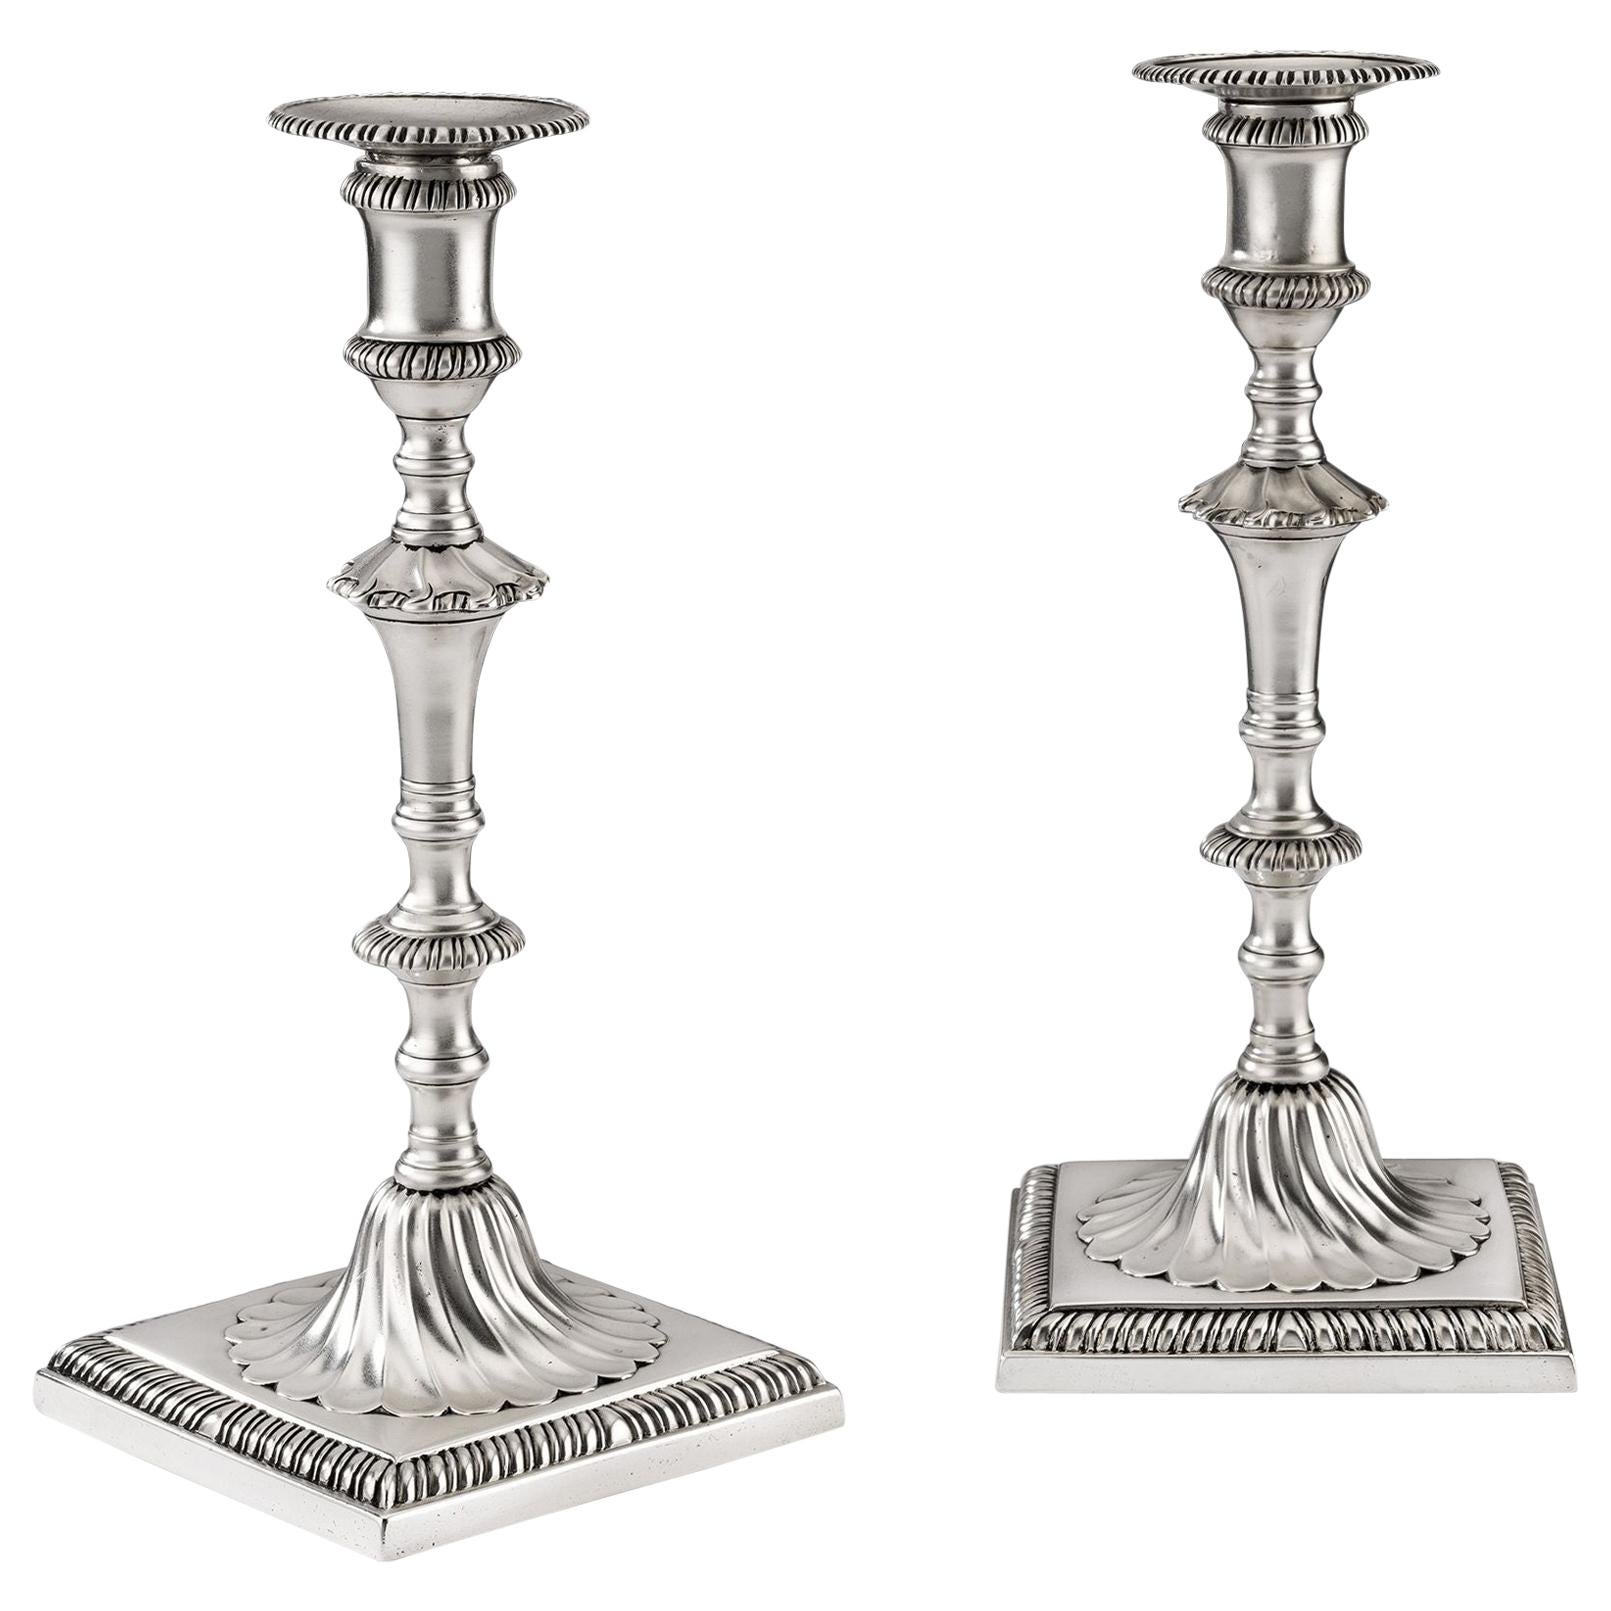 Pair of George III Cast Candlesticks Made in London in 1770 by John Carter II